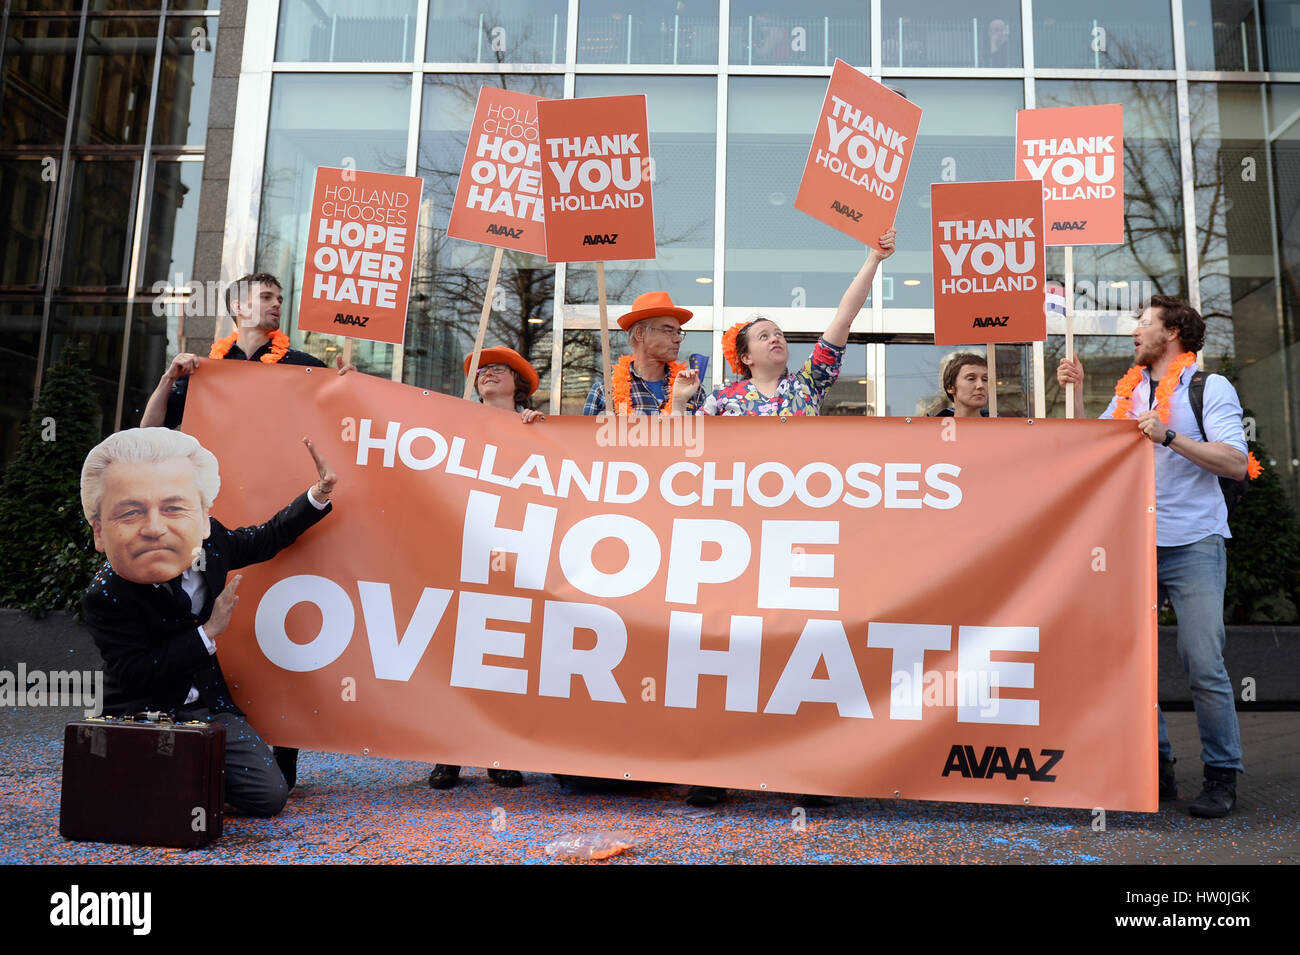 The Hague, Netherlands. 16th Mar, 2017. Demonstrators of the movement 'Avaaz' (Farzi for 'Voice') hold up posters reading 'Tahnk you Holland' and 'Holland chooses hope over hate' near the parliament in The Hague, Netherlands, 16 March 2017. The conservative-liberal party of the current Dutch Prime Minister Rutte received the most votes at the parliamentary elections on 15 March. Right-wing populist Wilders and his PVV party were less successful than expected. Photo: Daniel Reinhardt/dpa/Alamy Live News Stock Photo